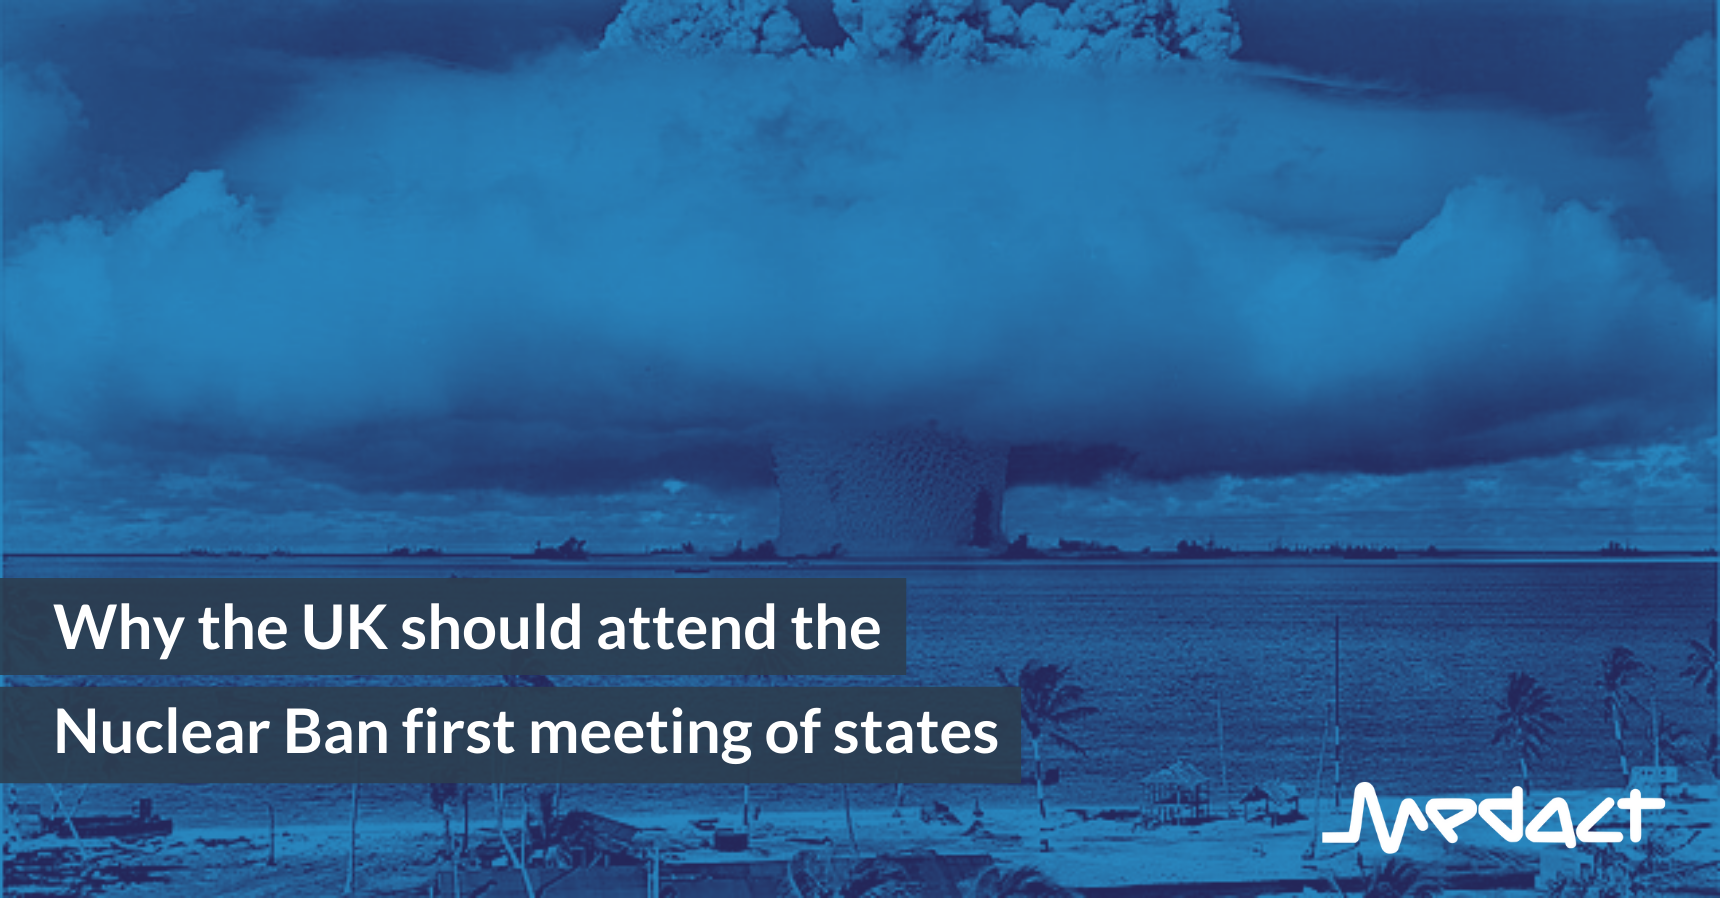 Why the UK should attend the Nuclear Ban first meeting of states